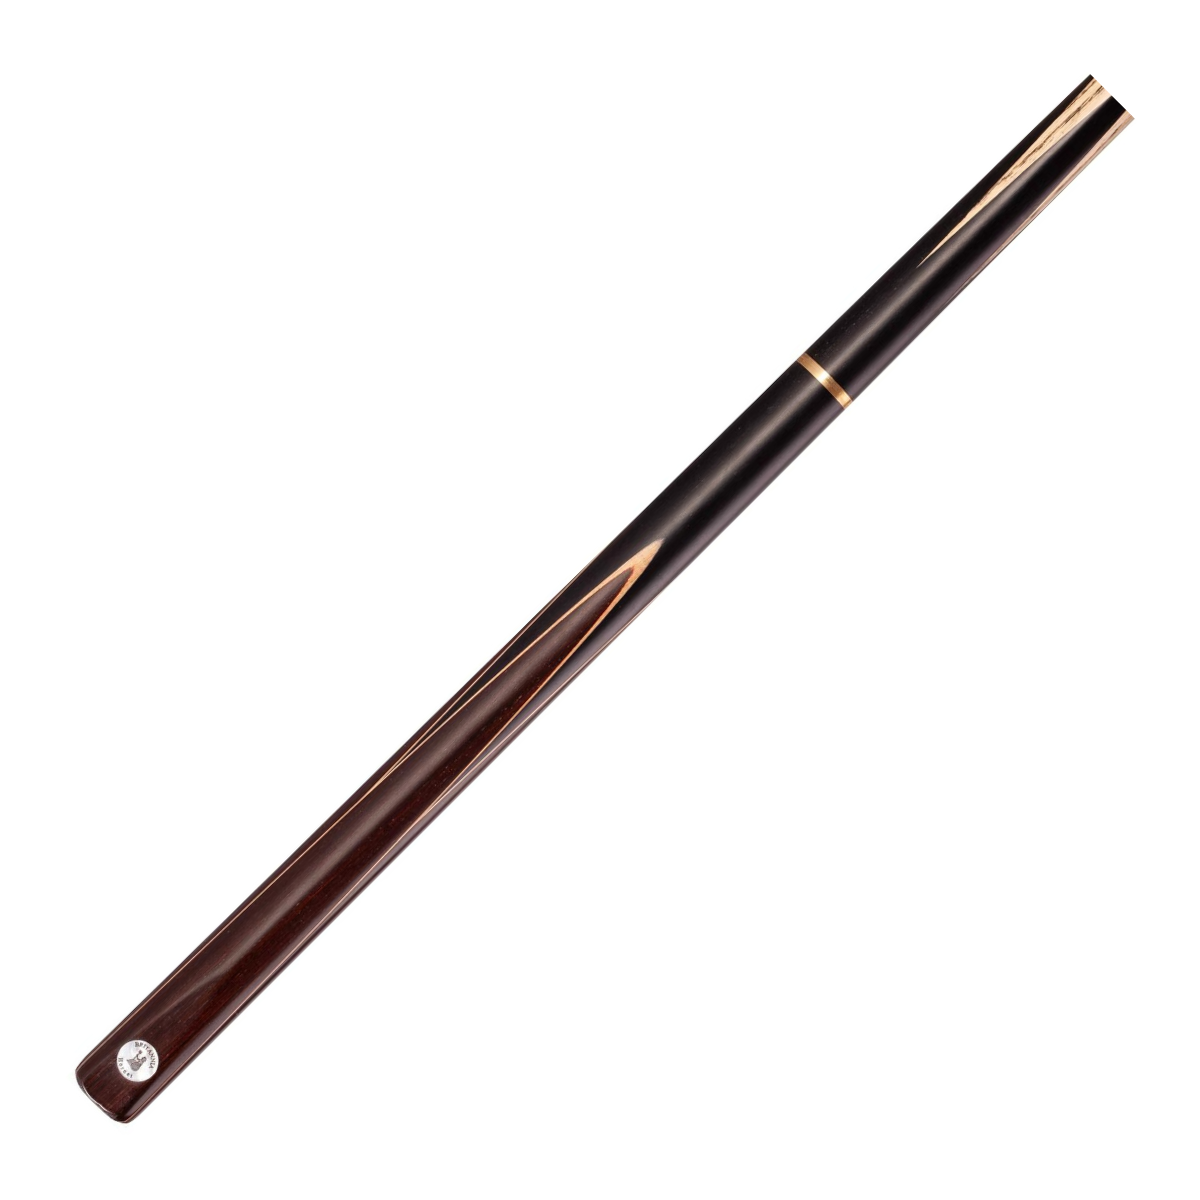 Britannia 3/4 Jointed Hornet Champion Snooker Cue